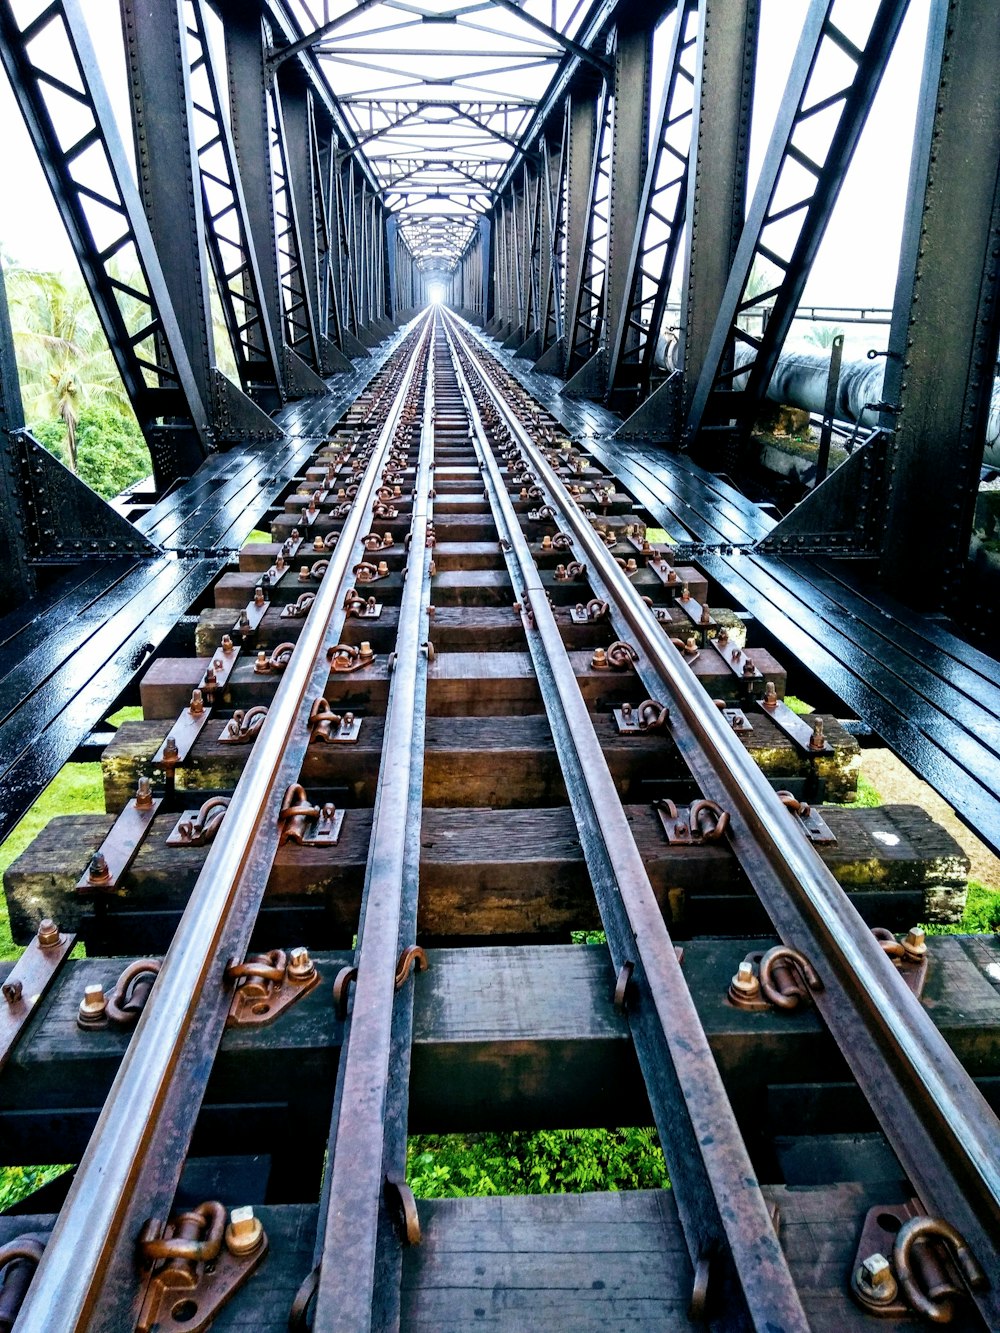 a view of a train track from the top of it